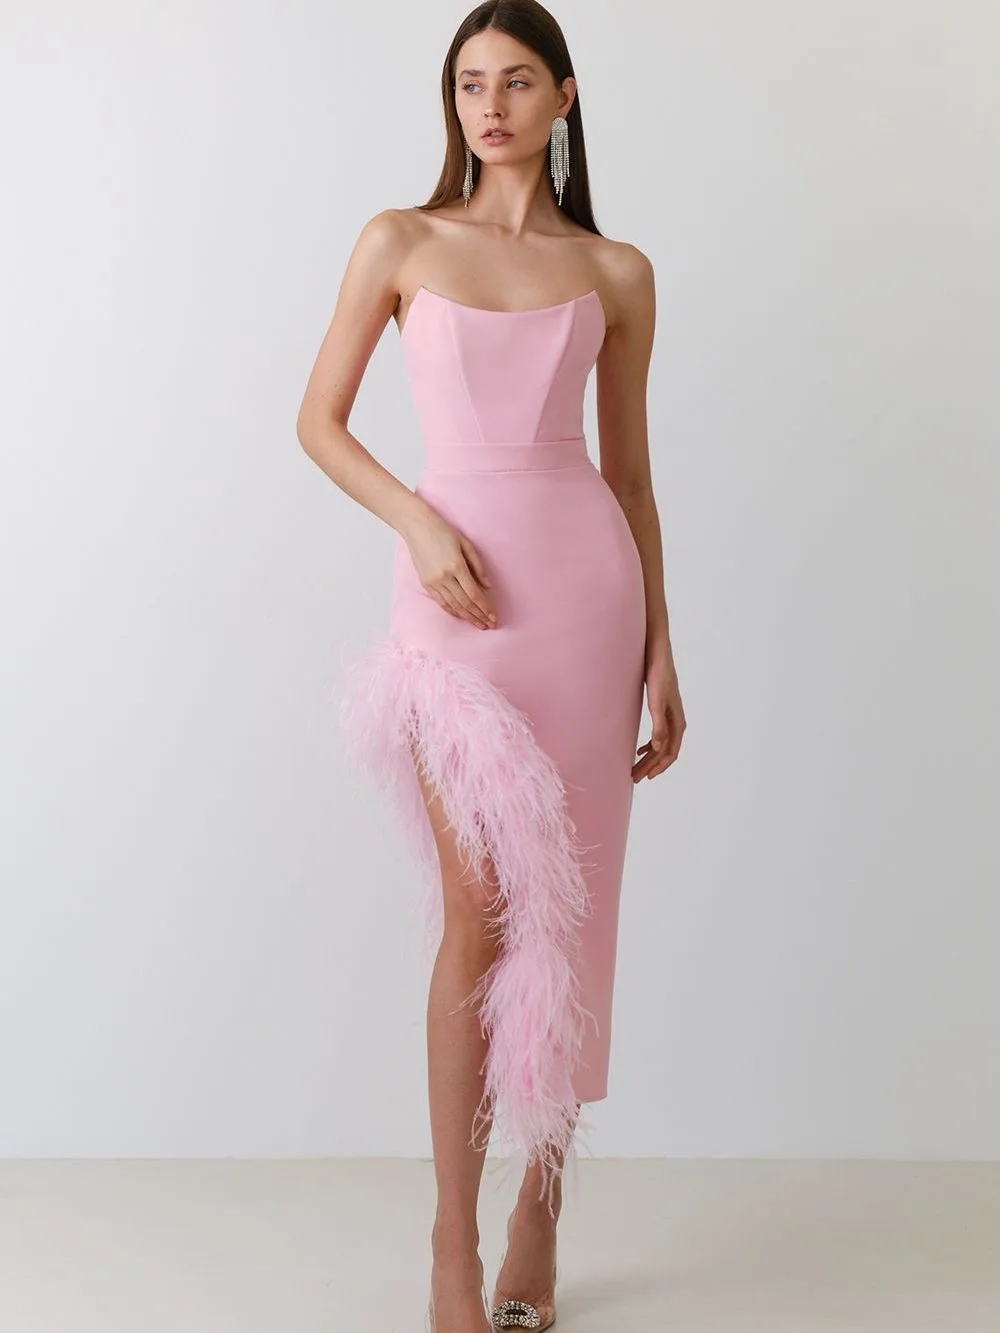 

Black White Pink Feather Strapless Bodycon Prom Bandage Dress Sexy Sleeveless Midi Celebrity Evening Runway Party Prom Dress